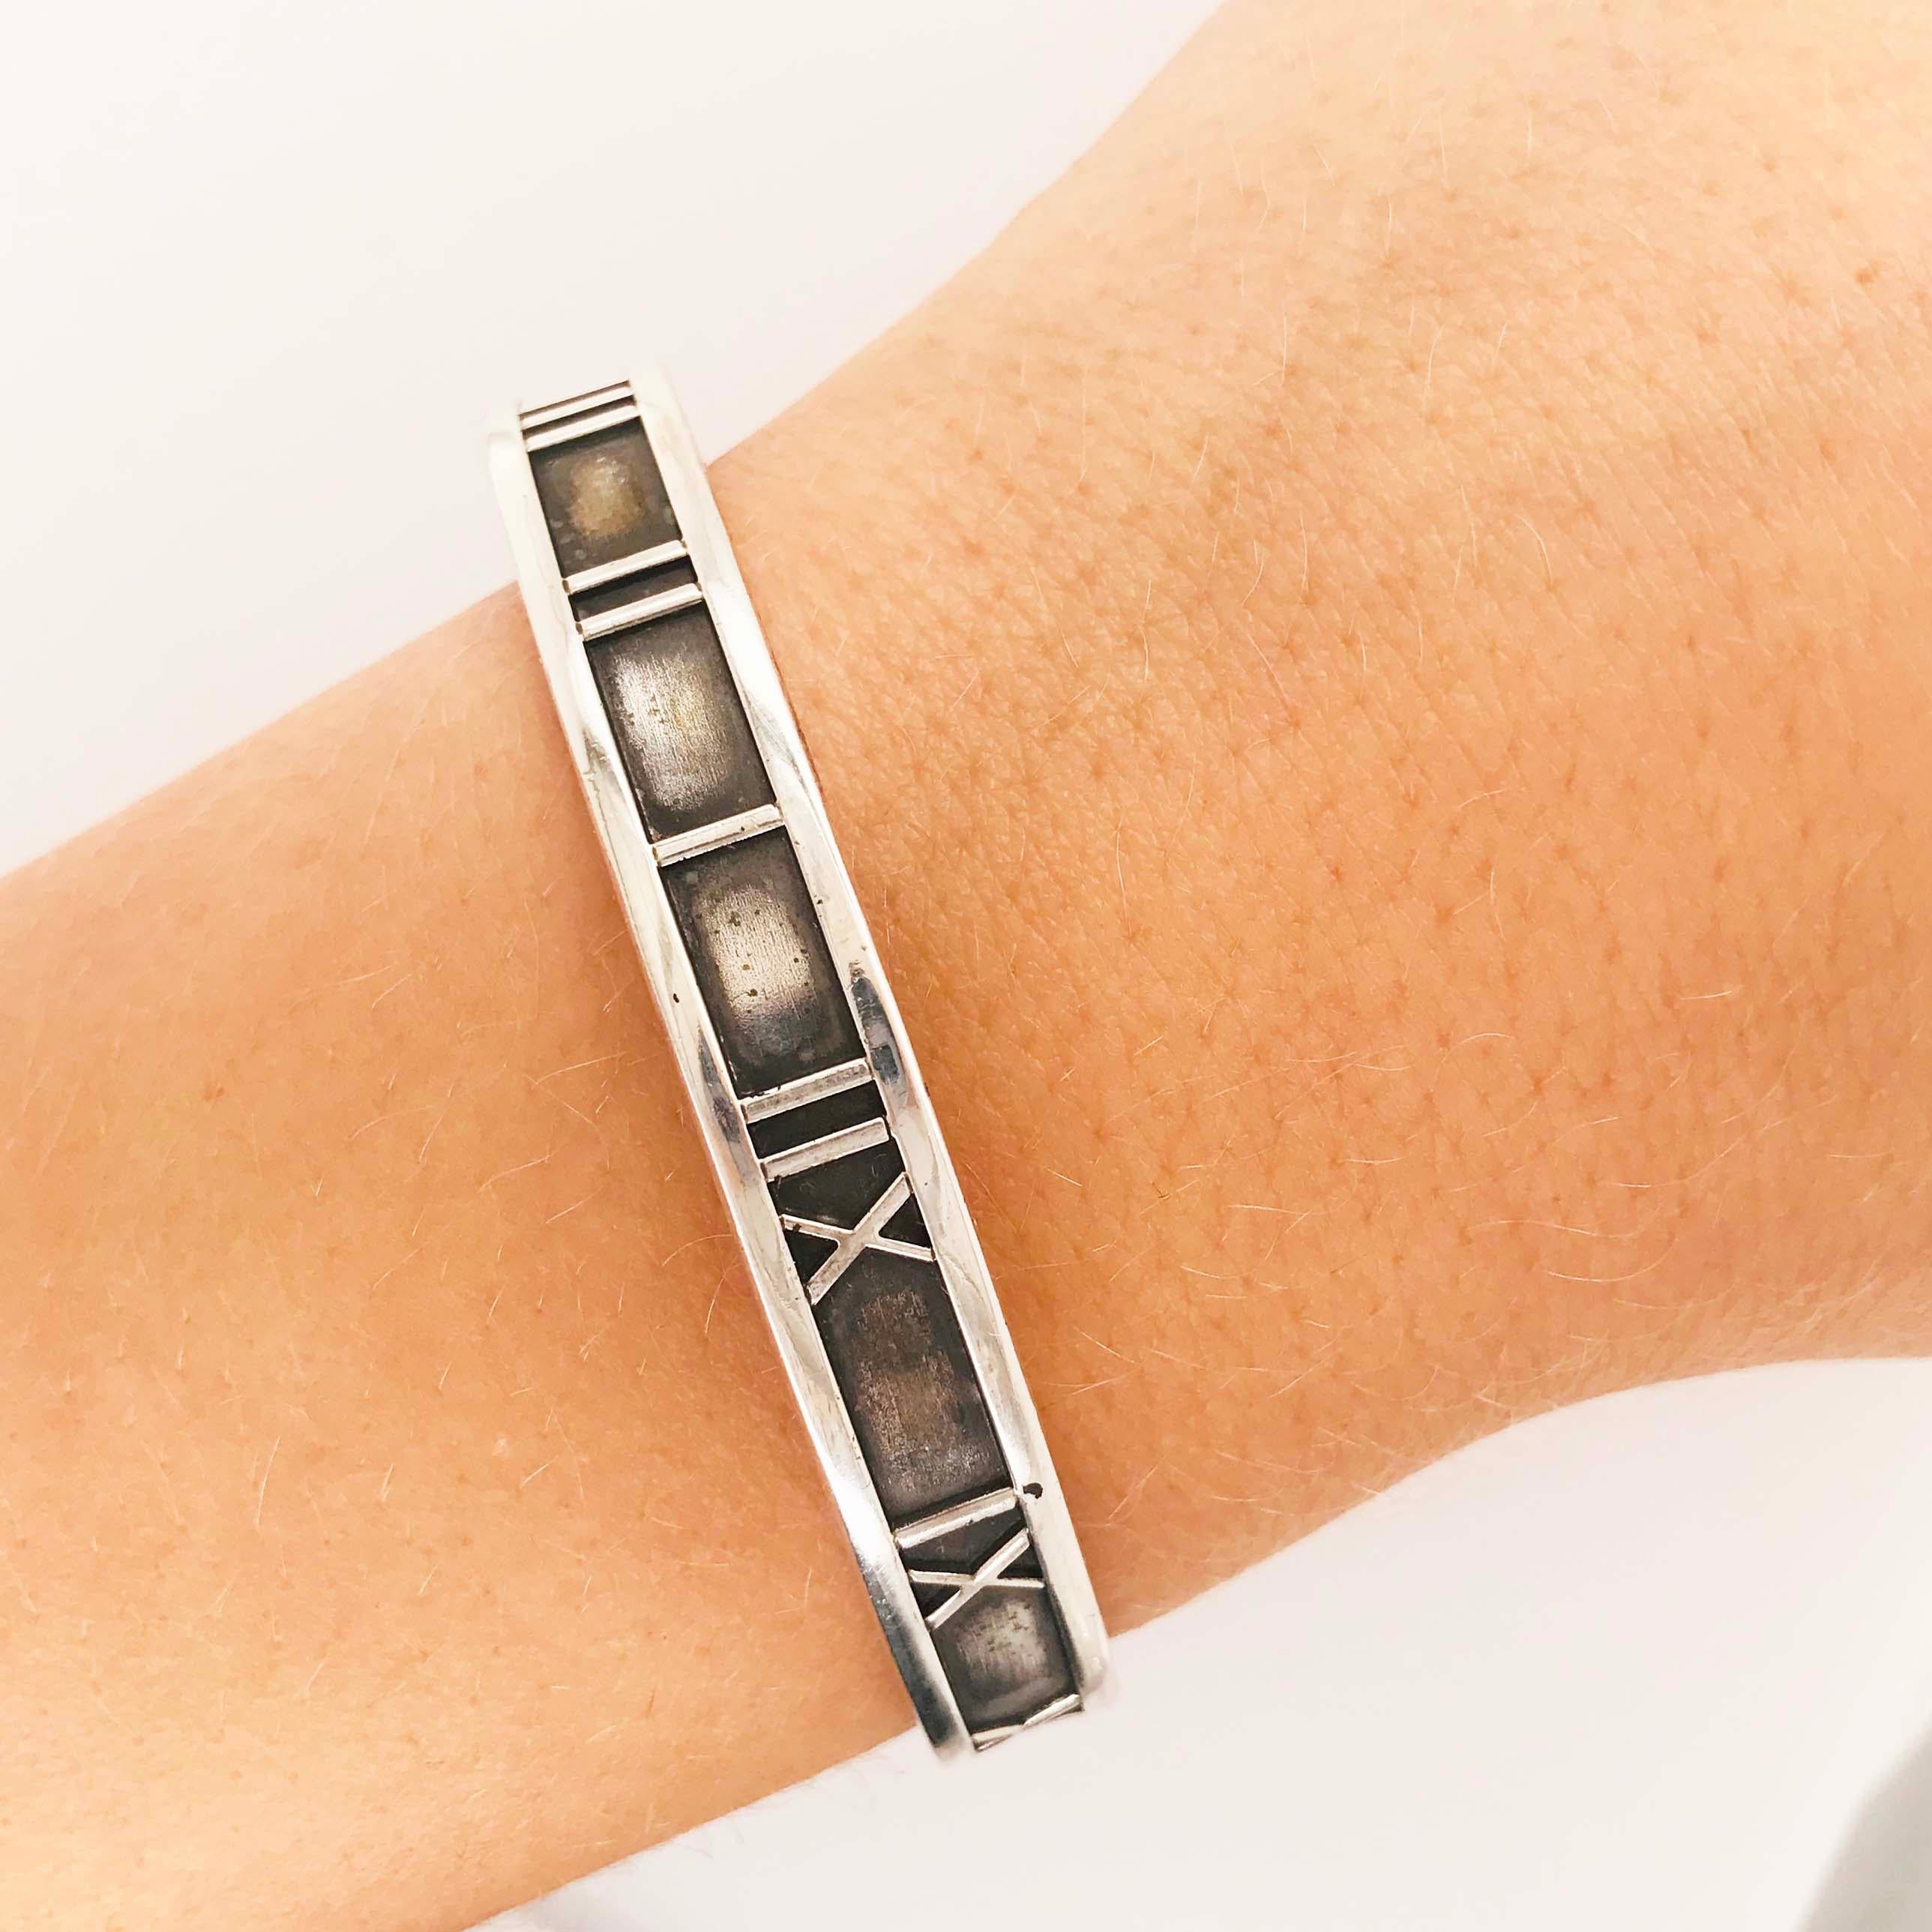 This gorgeous sterling silver cuff bracelet is an original, authentic Tiffany & Co. Atlas cuff bracelet. The Atlas cuff bracelet is an original 1995 Tiffany & Co. Atlas design with a sleek, classic Roman numeral design. The sterling silver bracelet